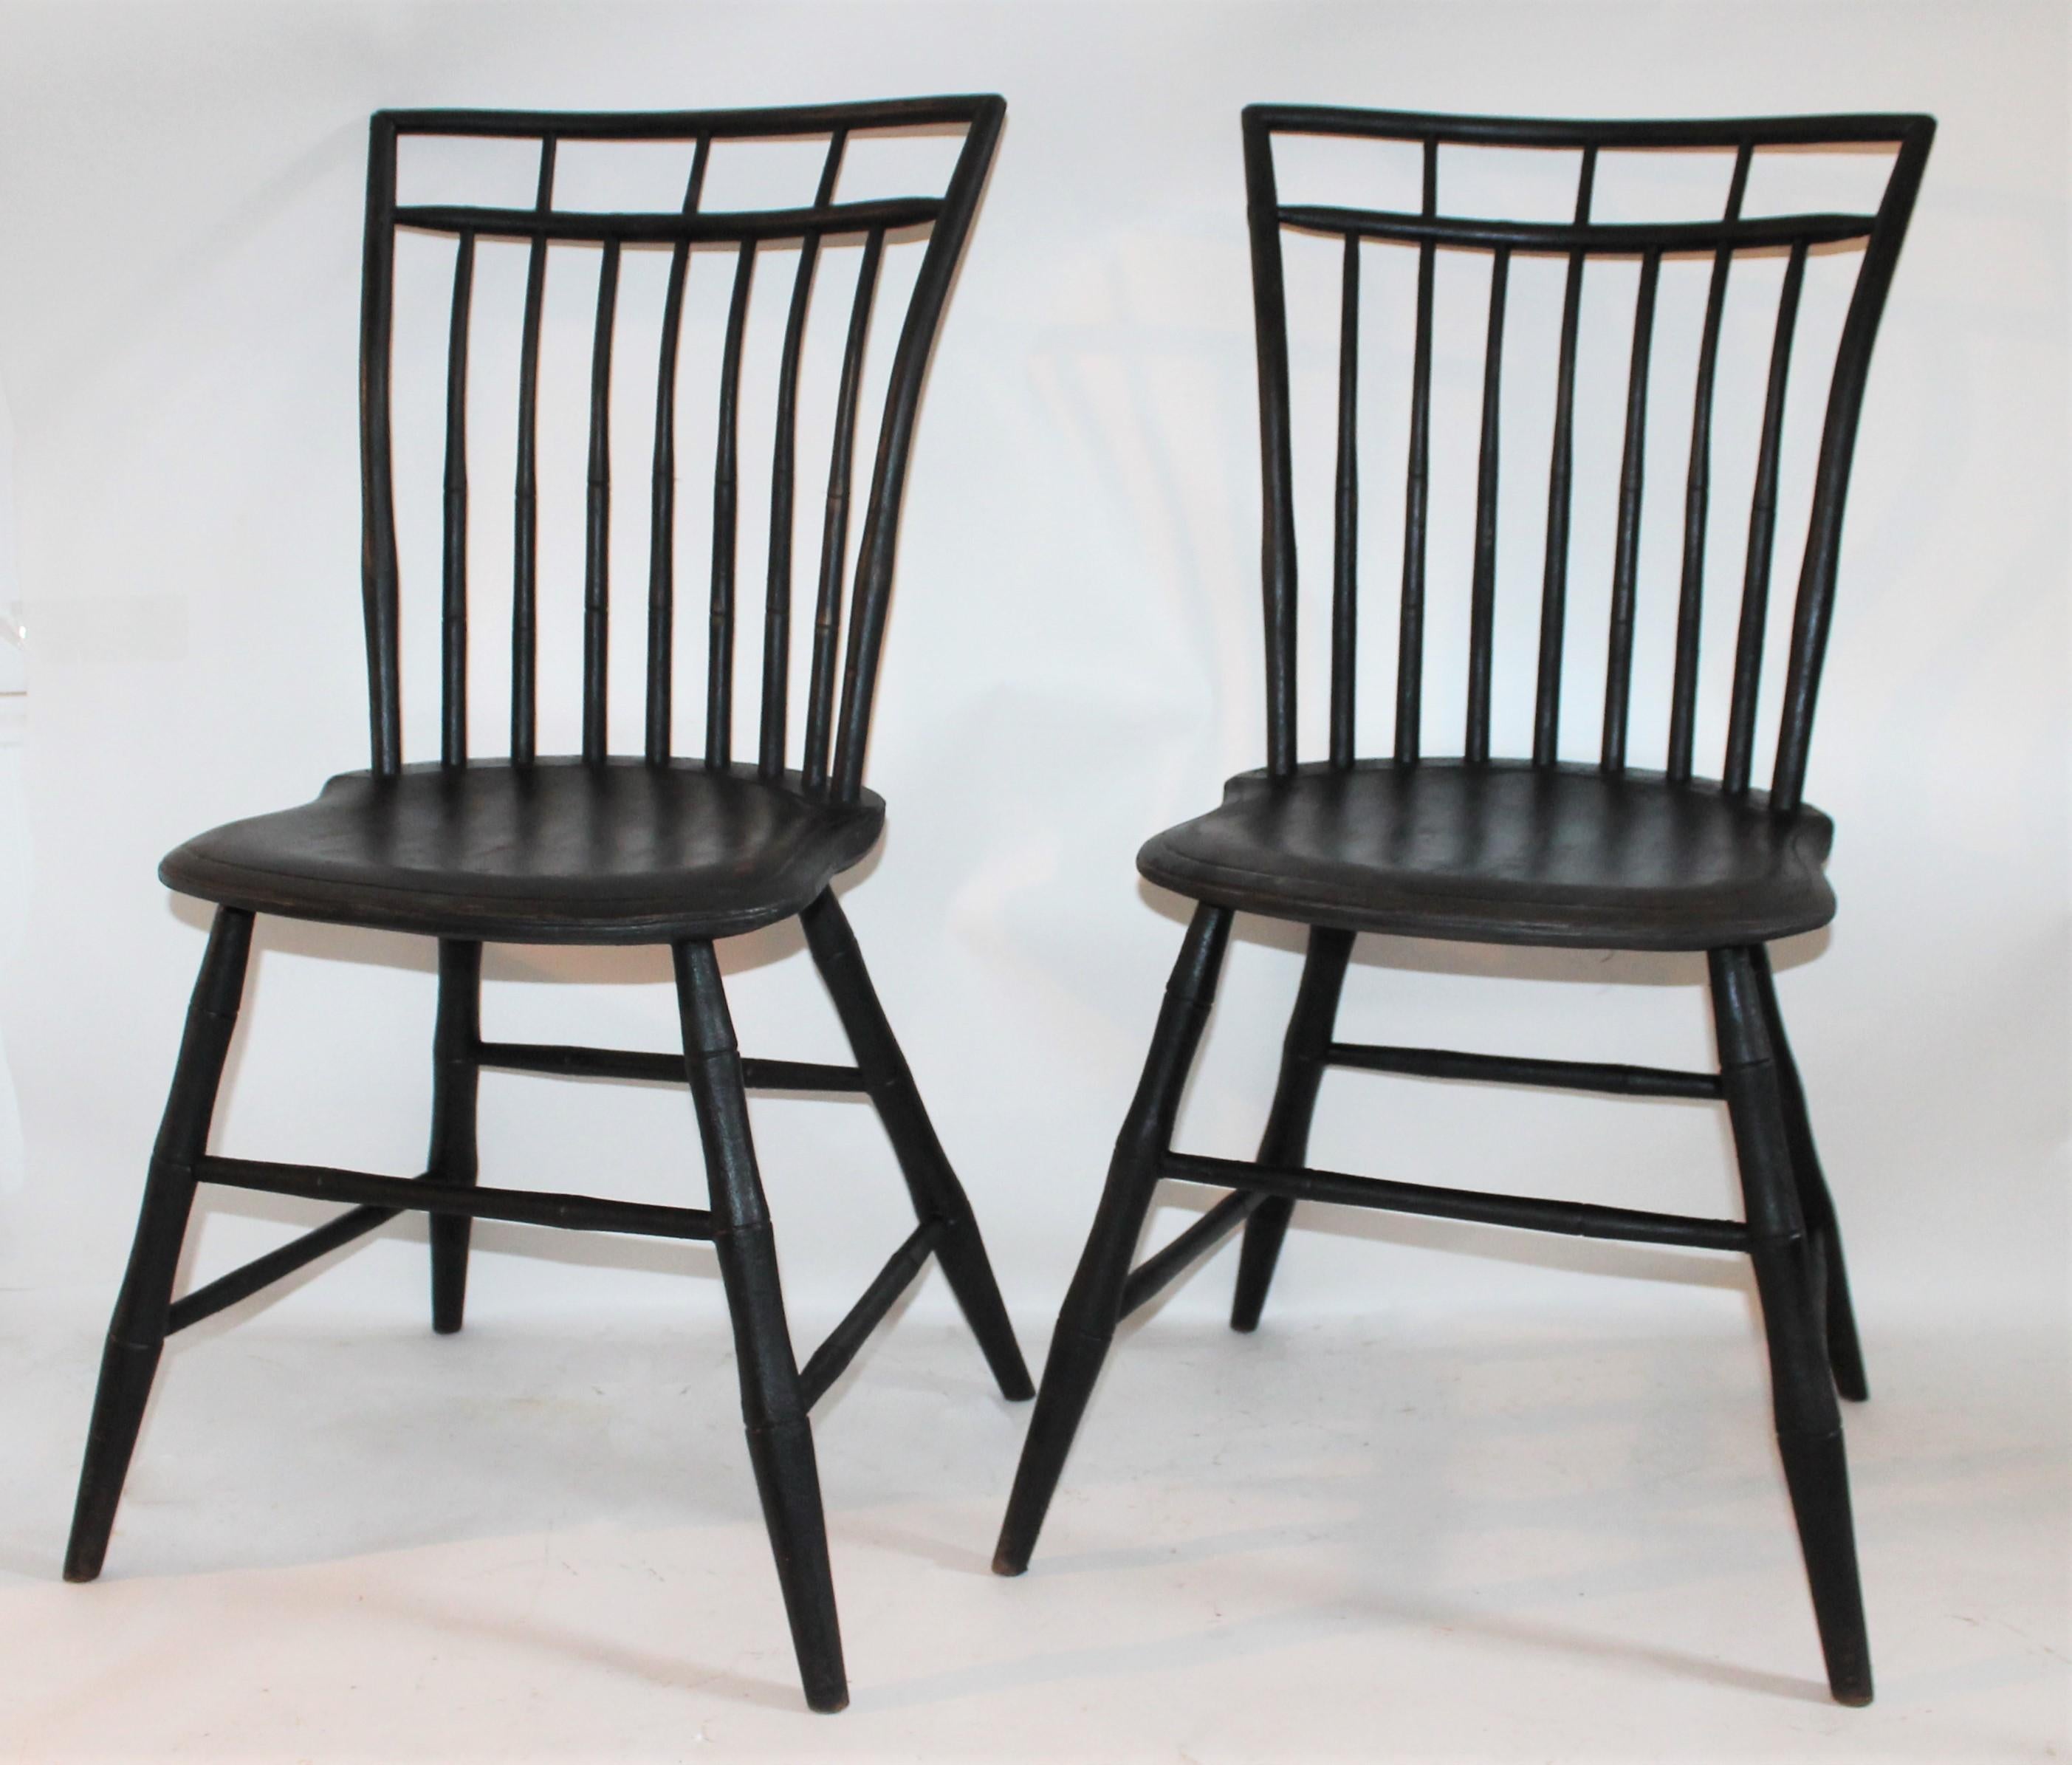 19th century original painted black over dark chocolate birdcage Windsor chairs. The condition is very good with wear on the seats consistent with age and use.